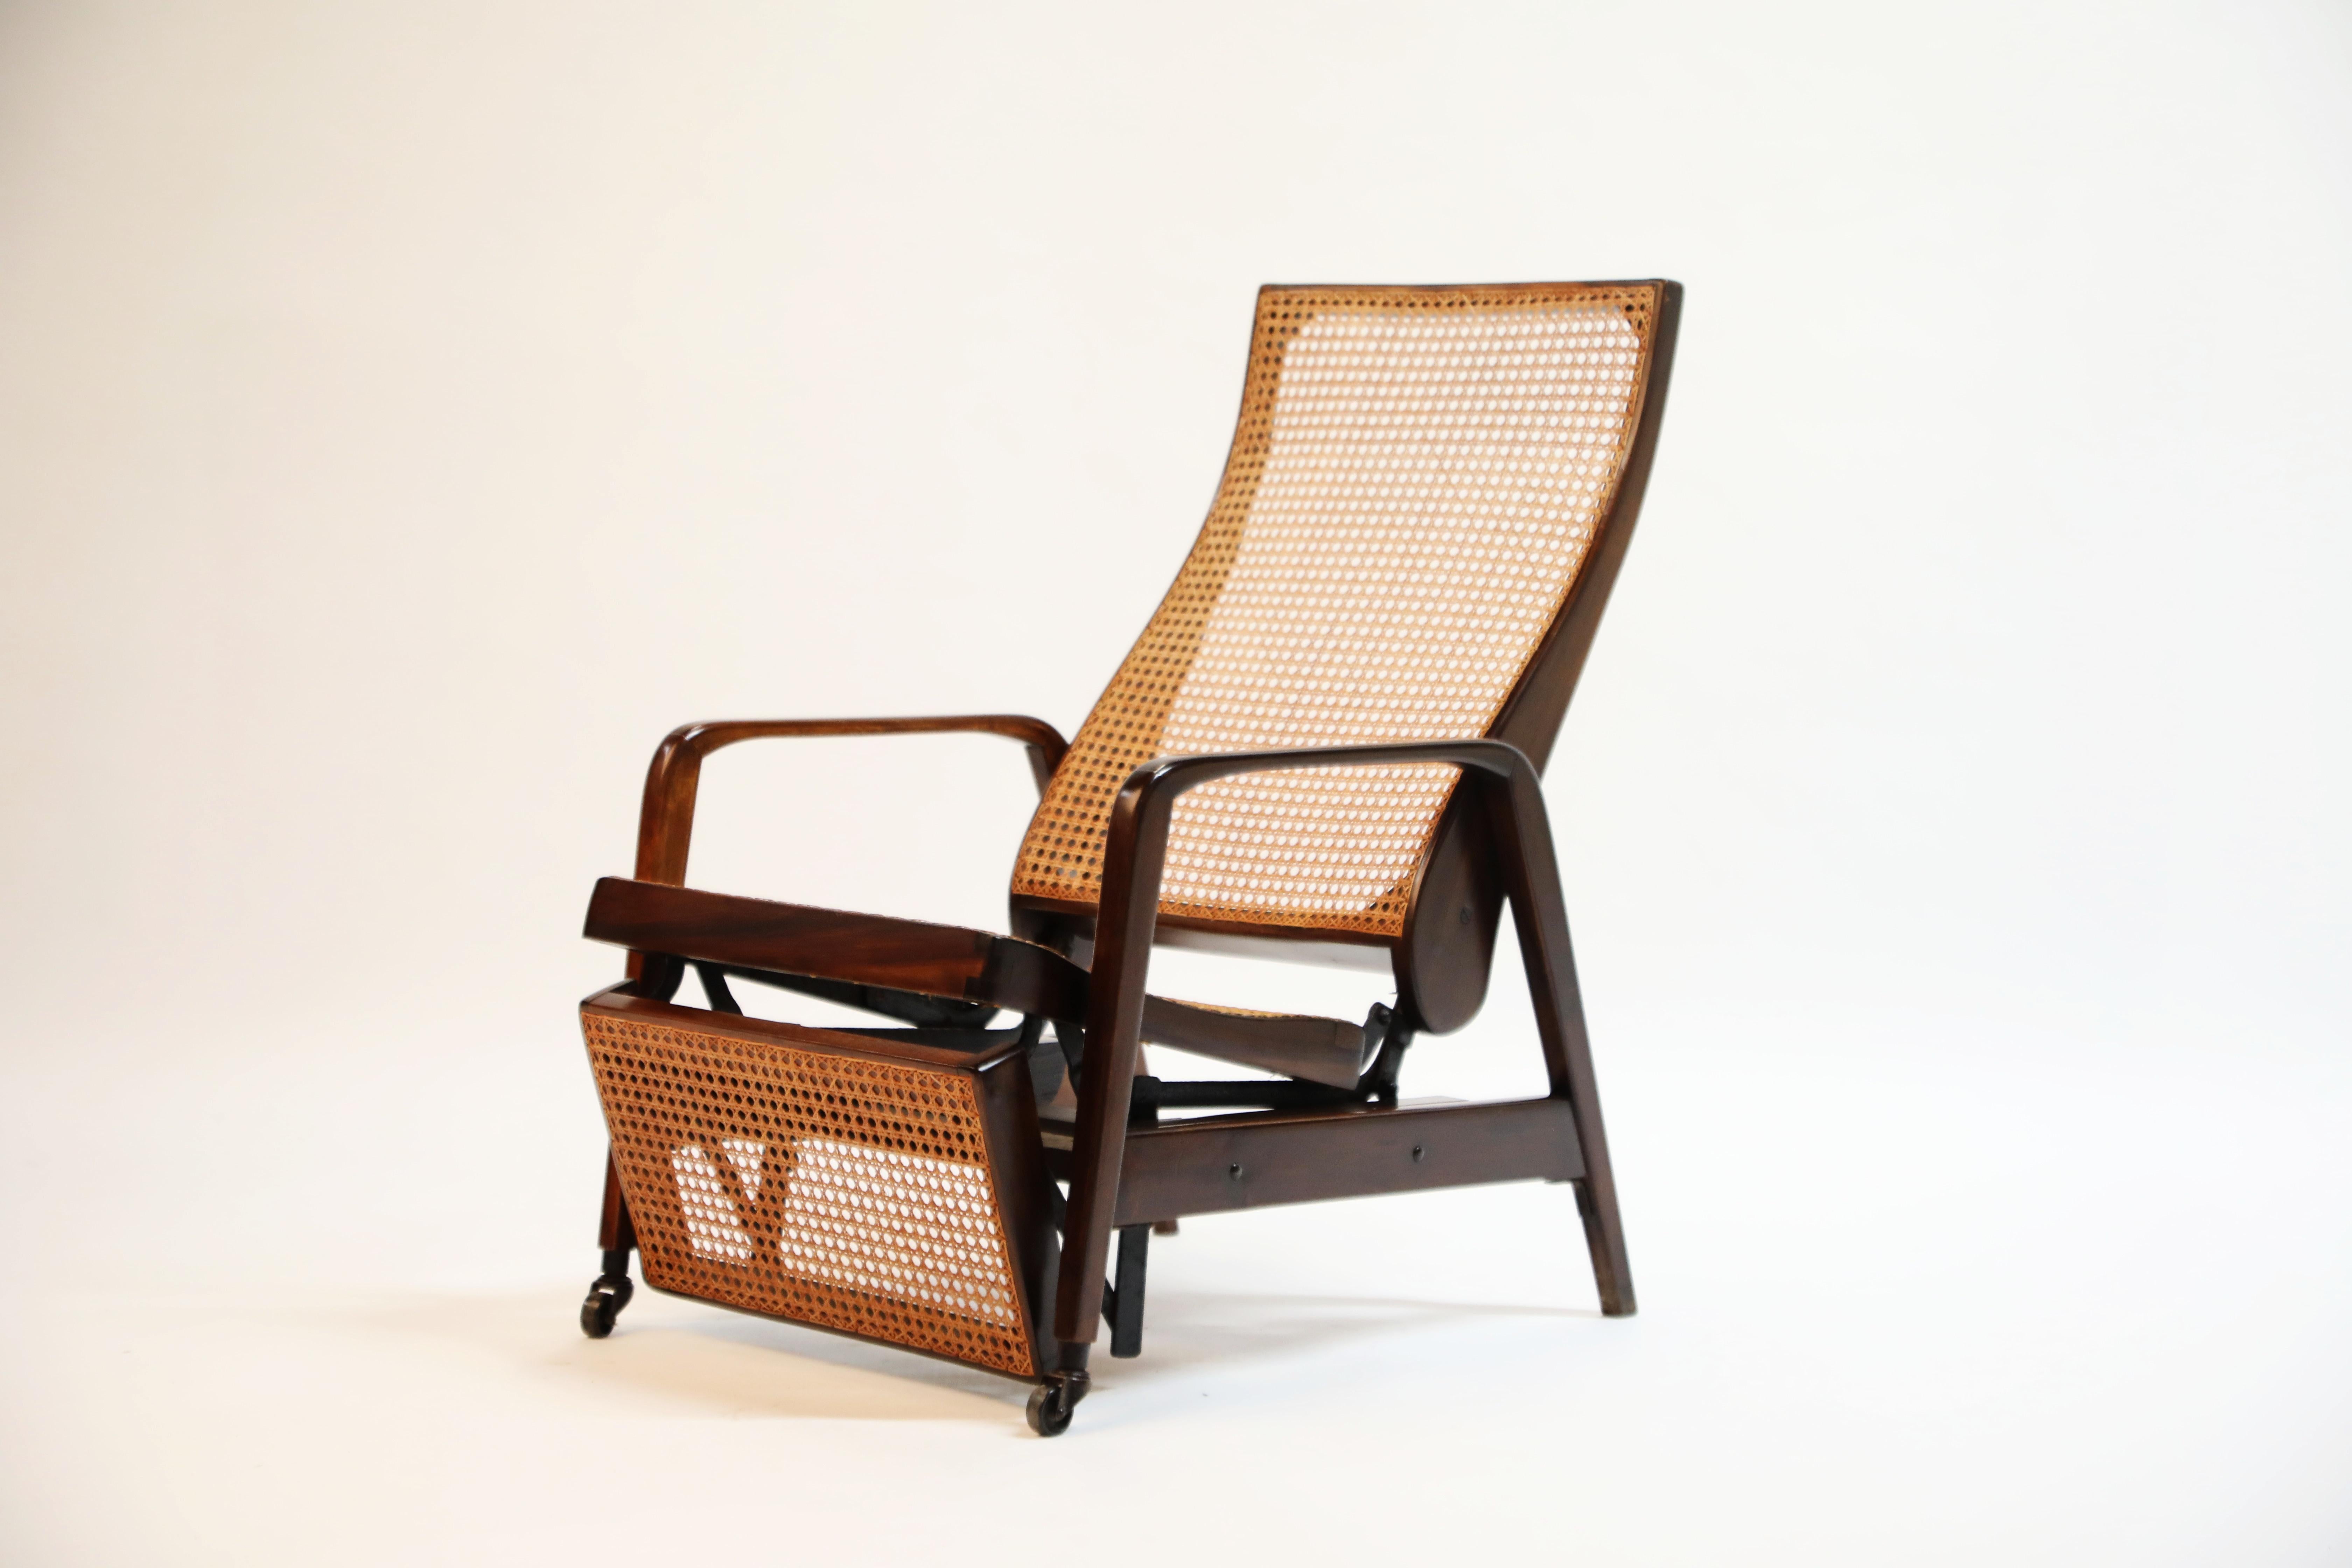 A beautiful caned reclining chair in Brazilian Jacaranda Rosewood made in Brazil circa 1940 with a sweeping curved seat back, sculptural arms and wheeled front legs. We recently imported this piece for Rio de Janeiro where we sourced this along with